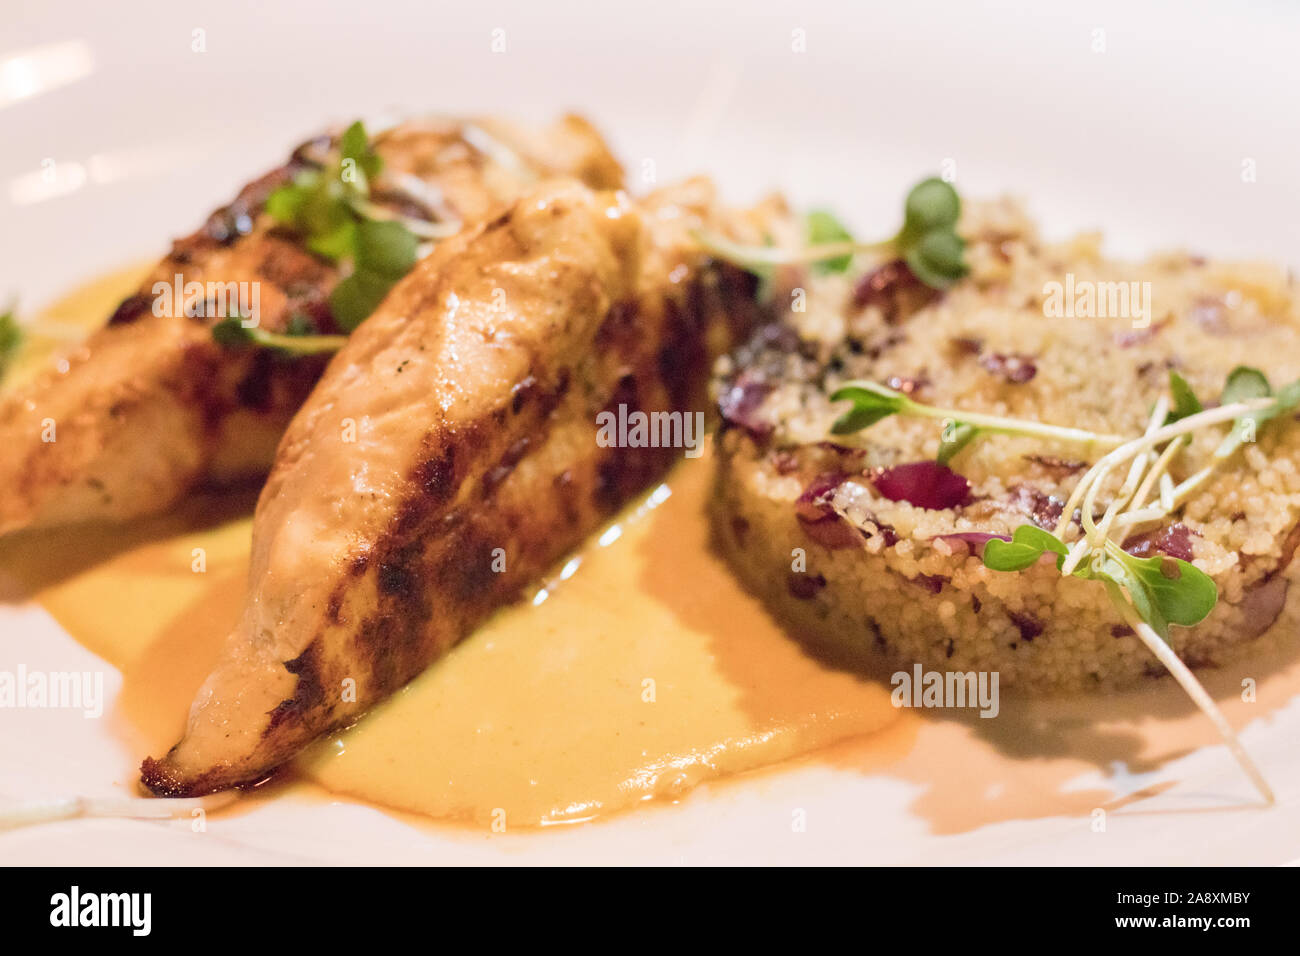 Cous cous and grilled chicken fillet Stock Photo